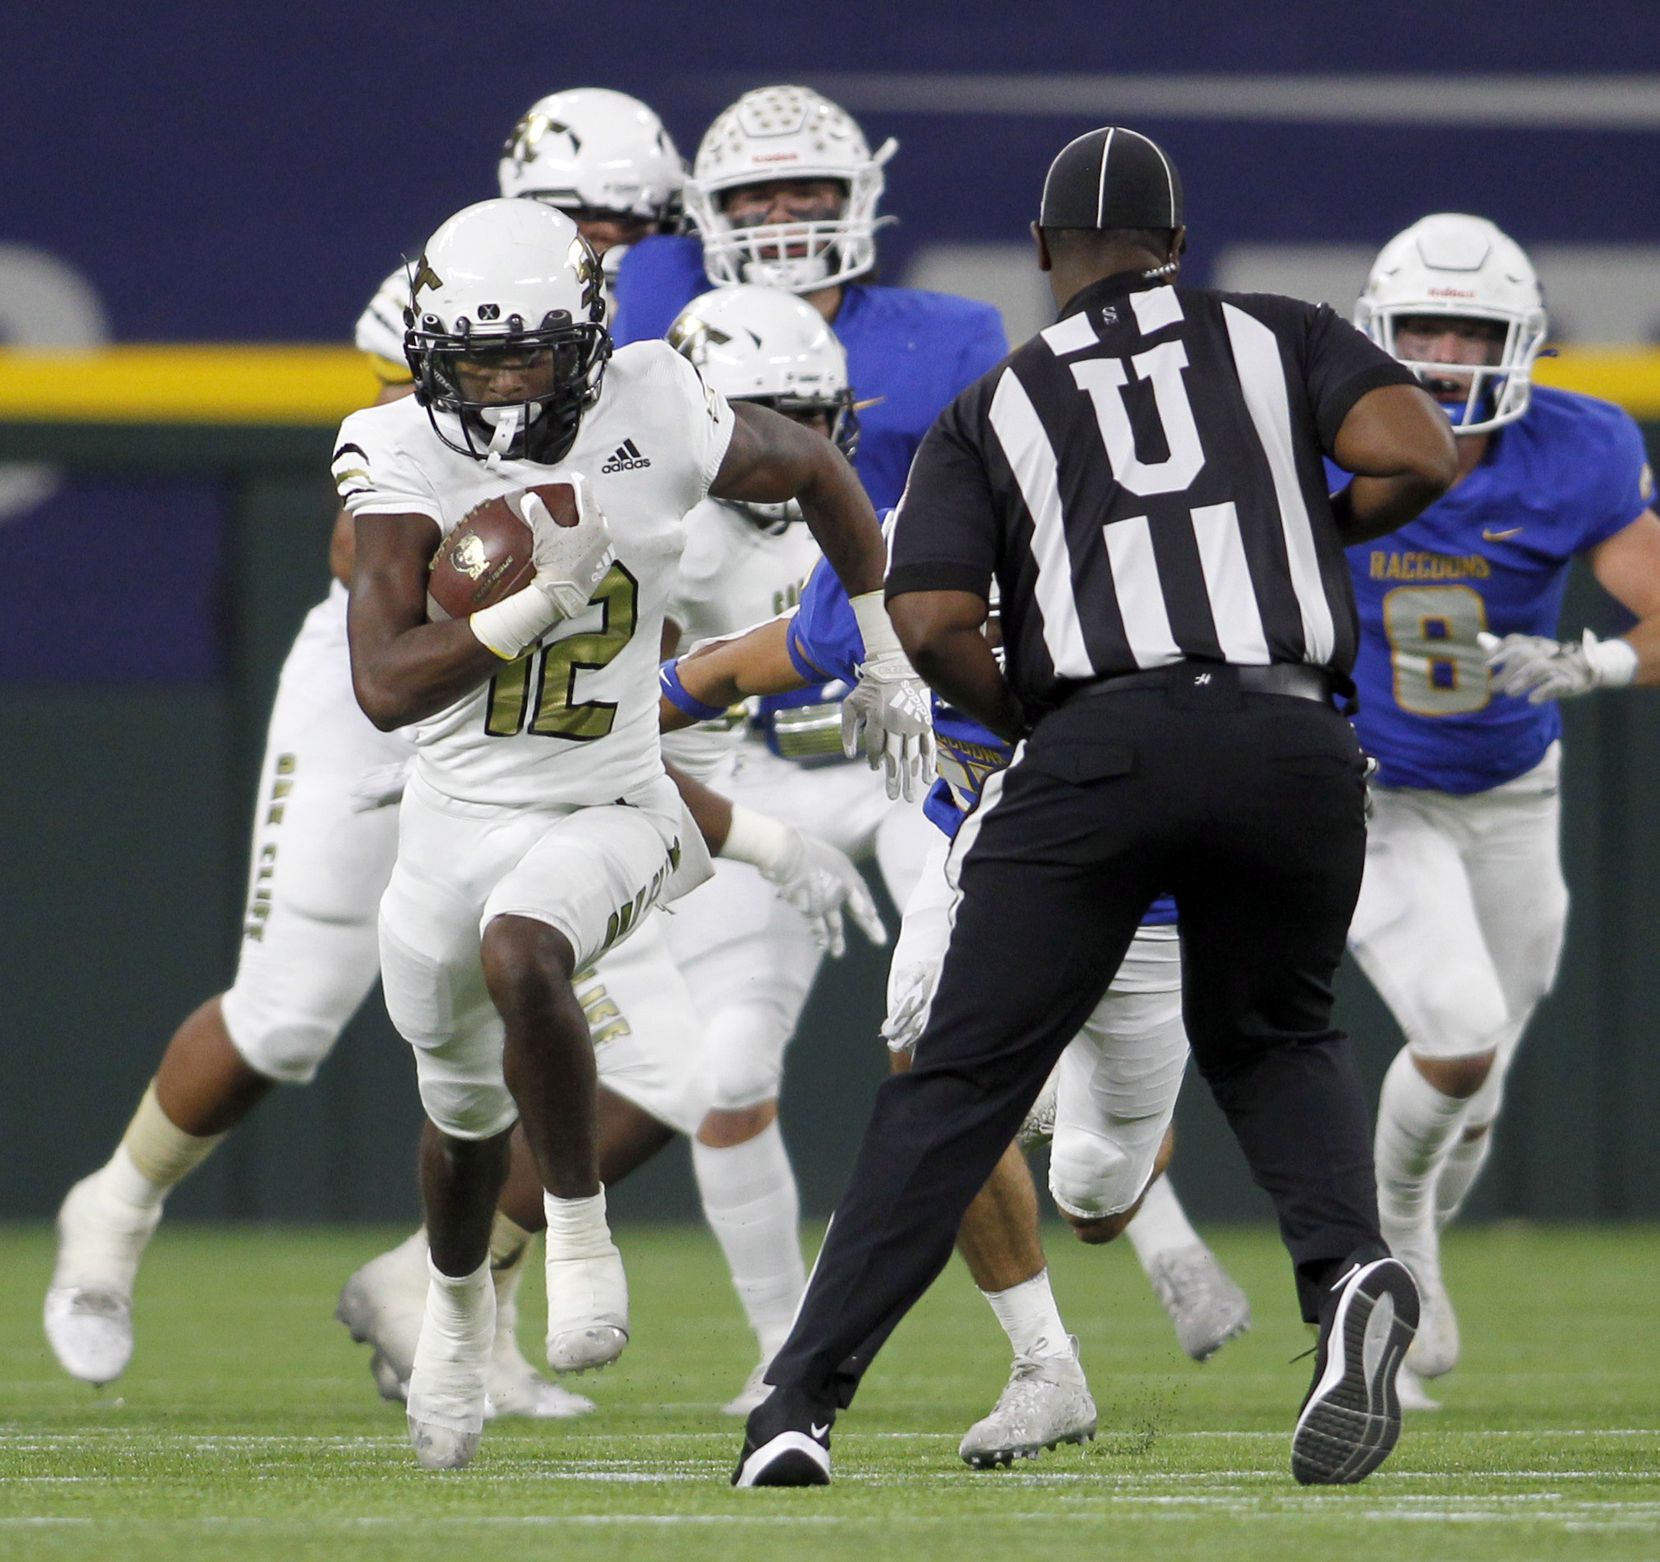 South Oak Cliff running back KeAndra Hollywood (12) sprints into the Frisco secondary as a...